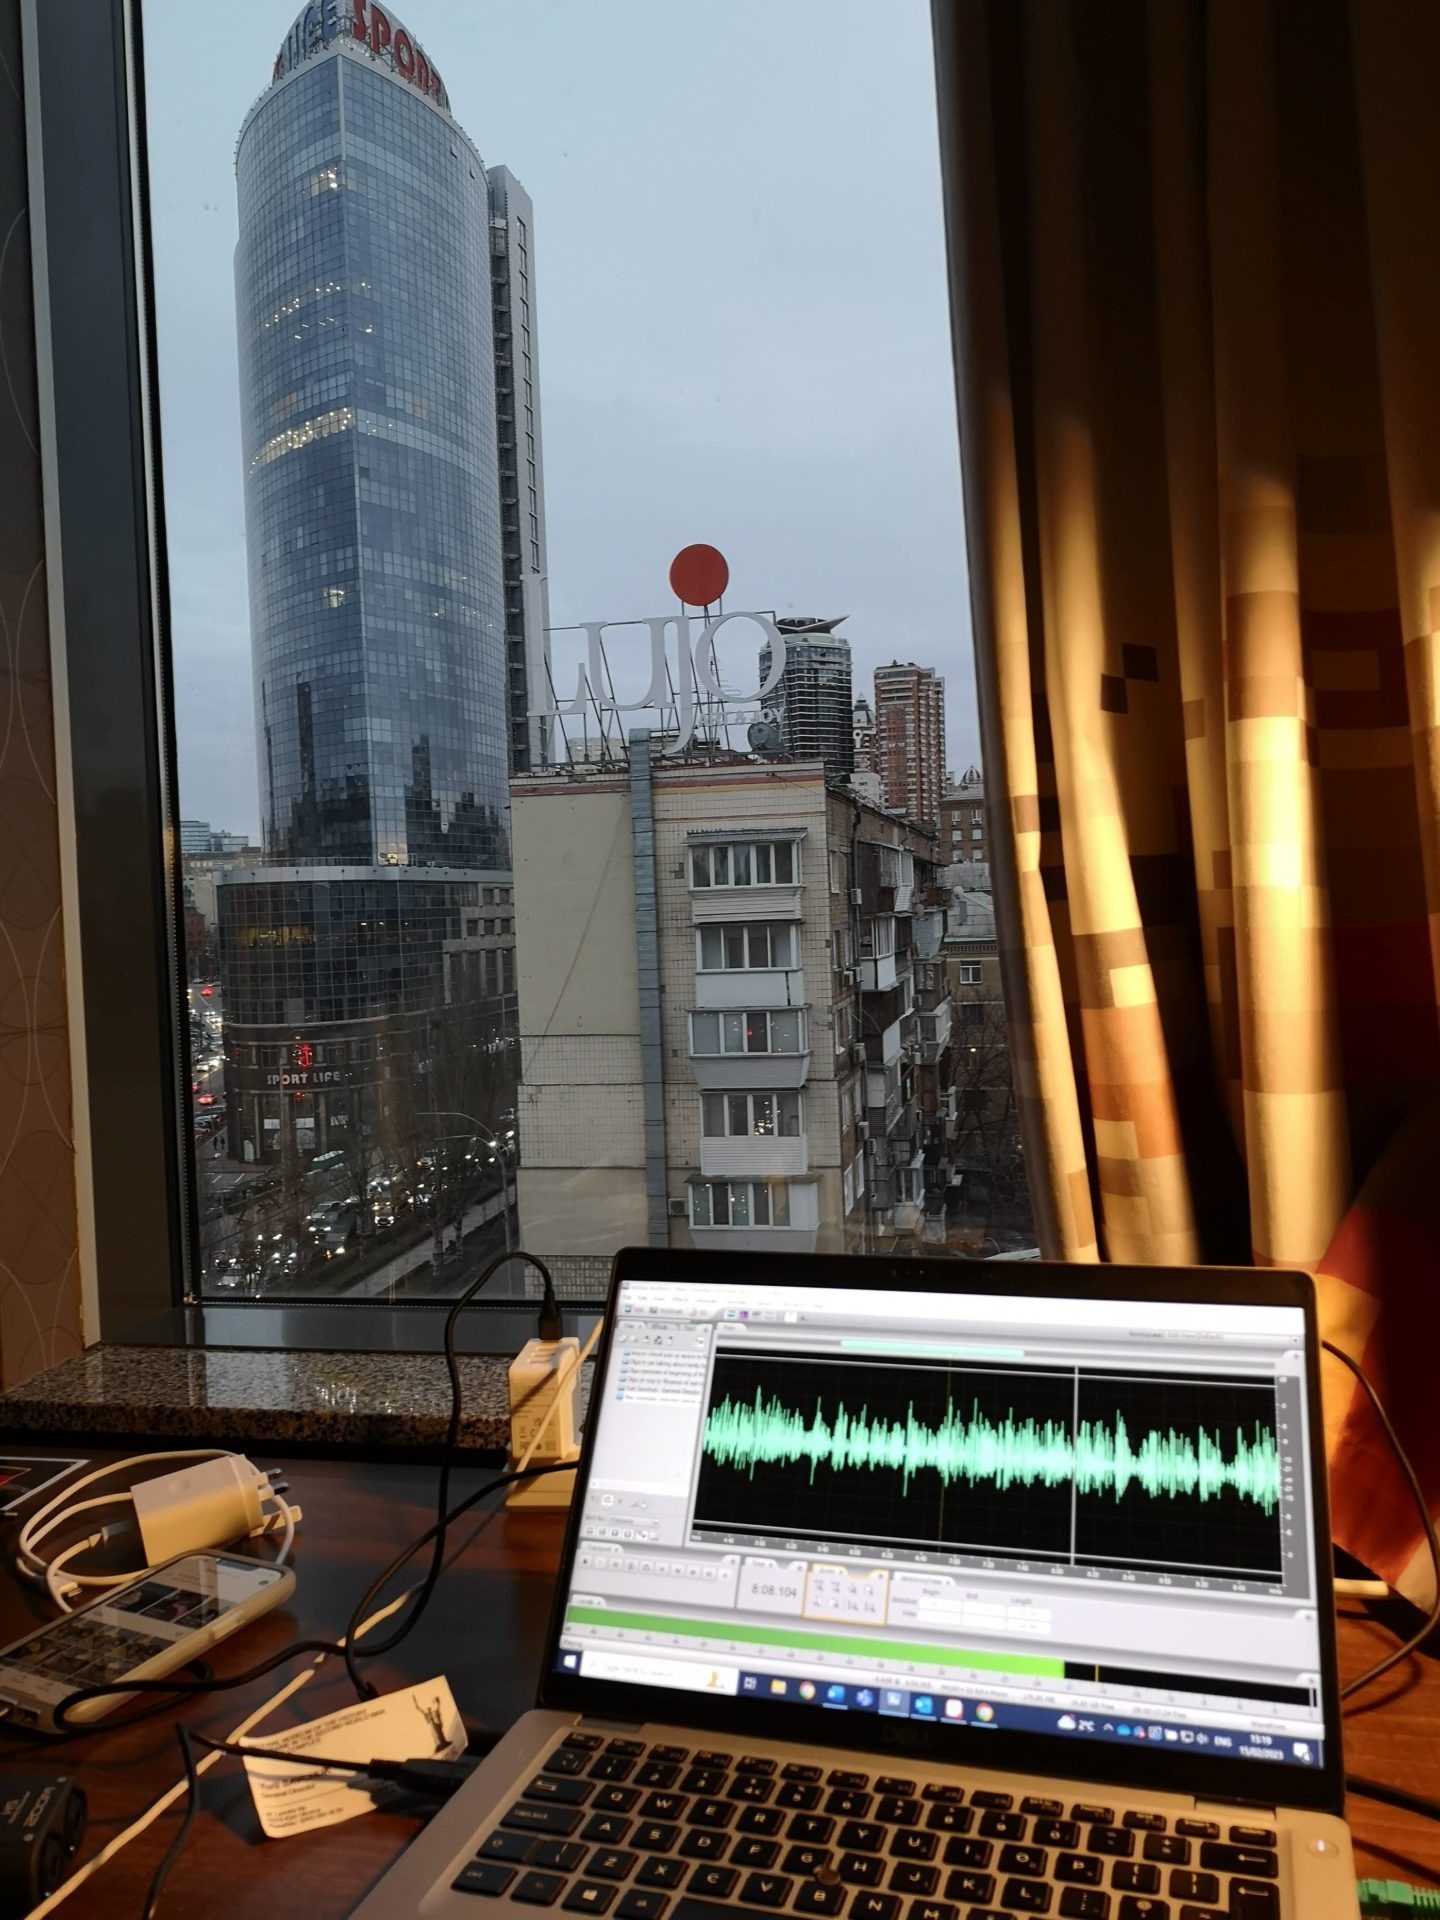 Editing while looking out towards the Kyiv skyline.